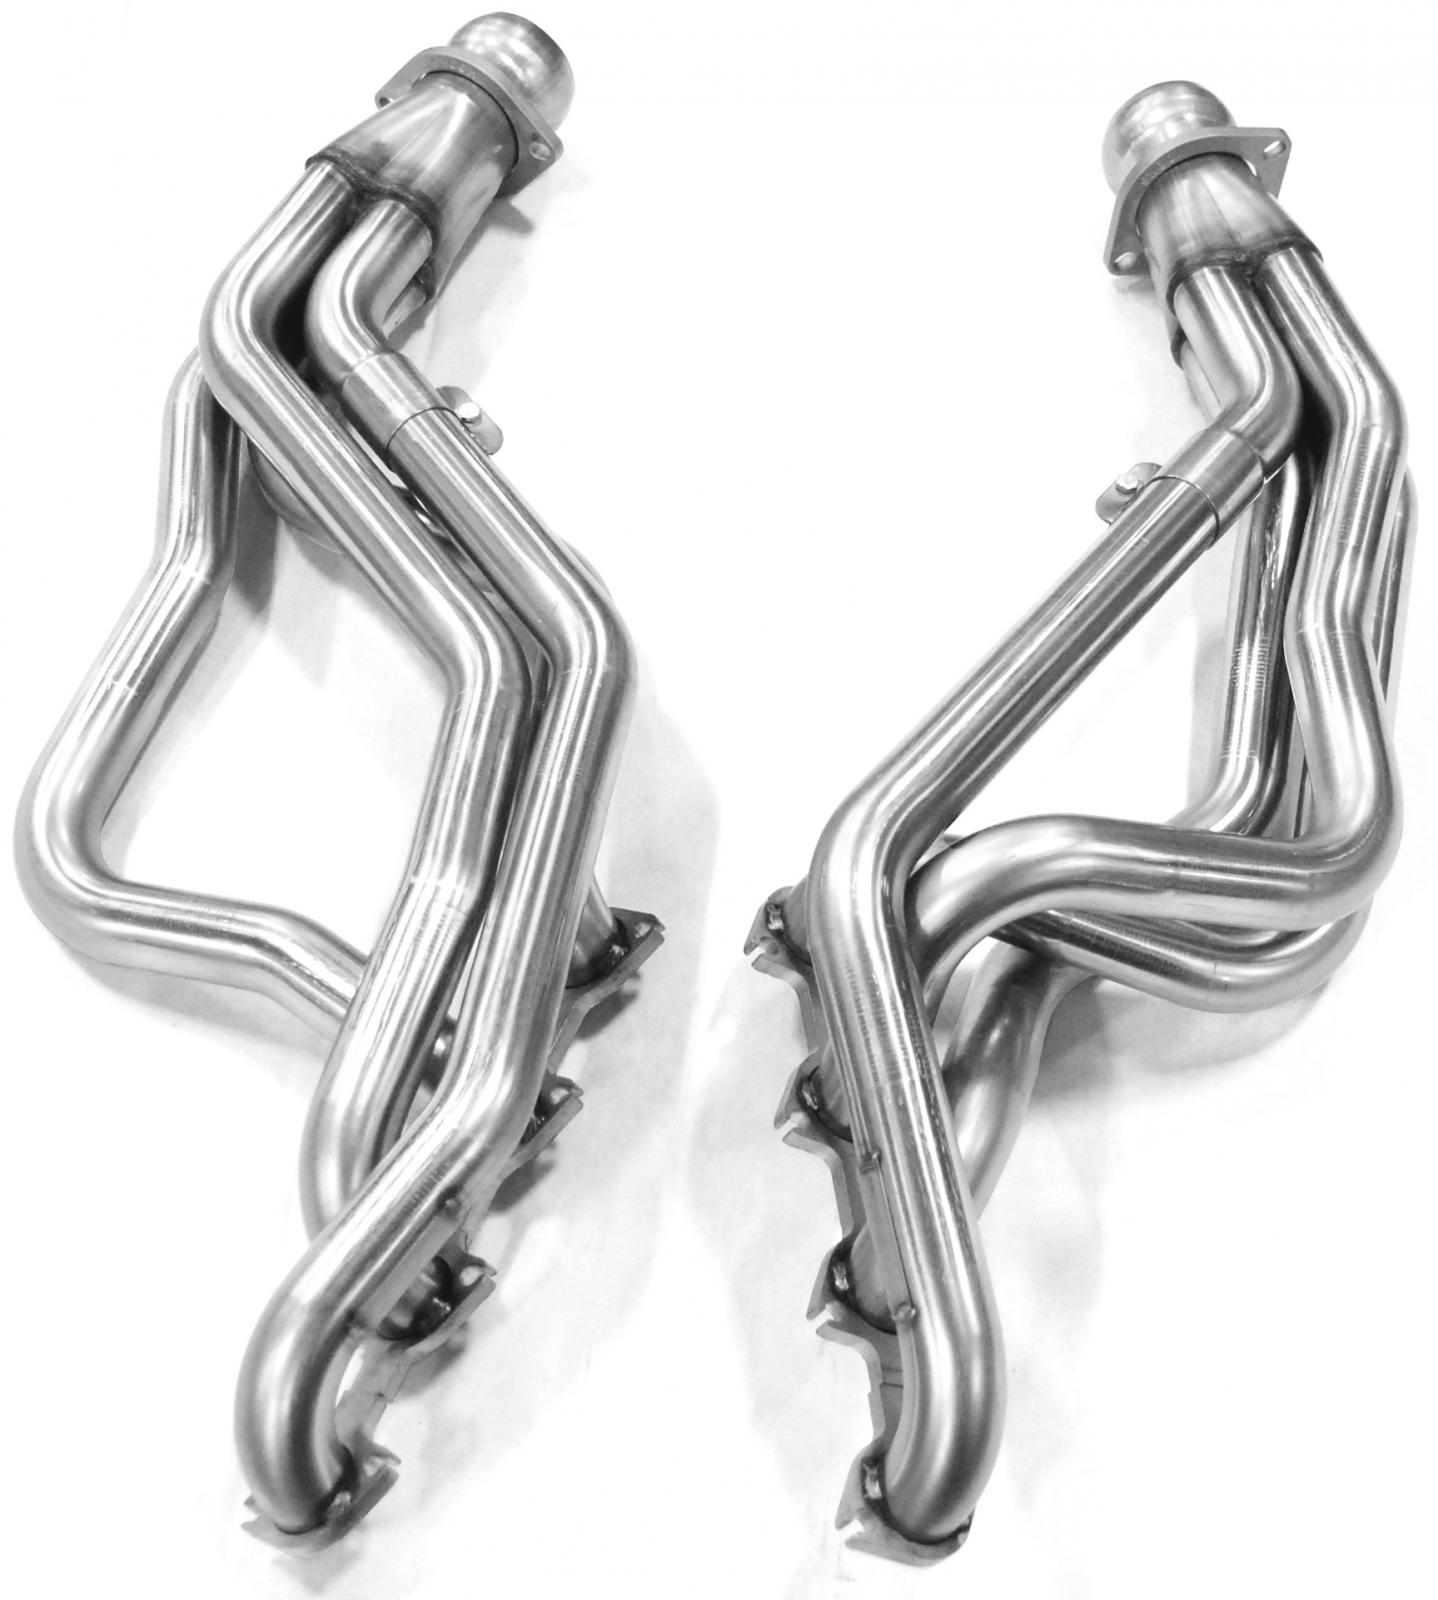 Stainless Steel Headers 1.75 x 3" Long Tube Incl. 24" O2 Sensor Extension Harness No EGR